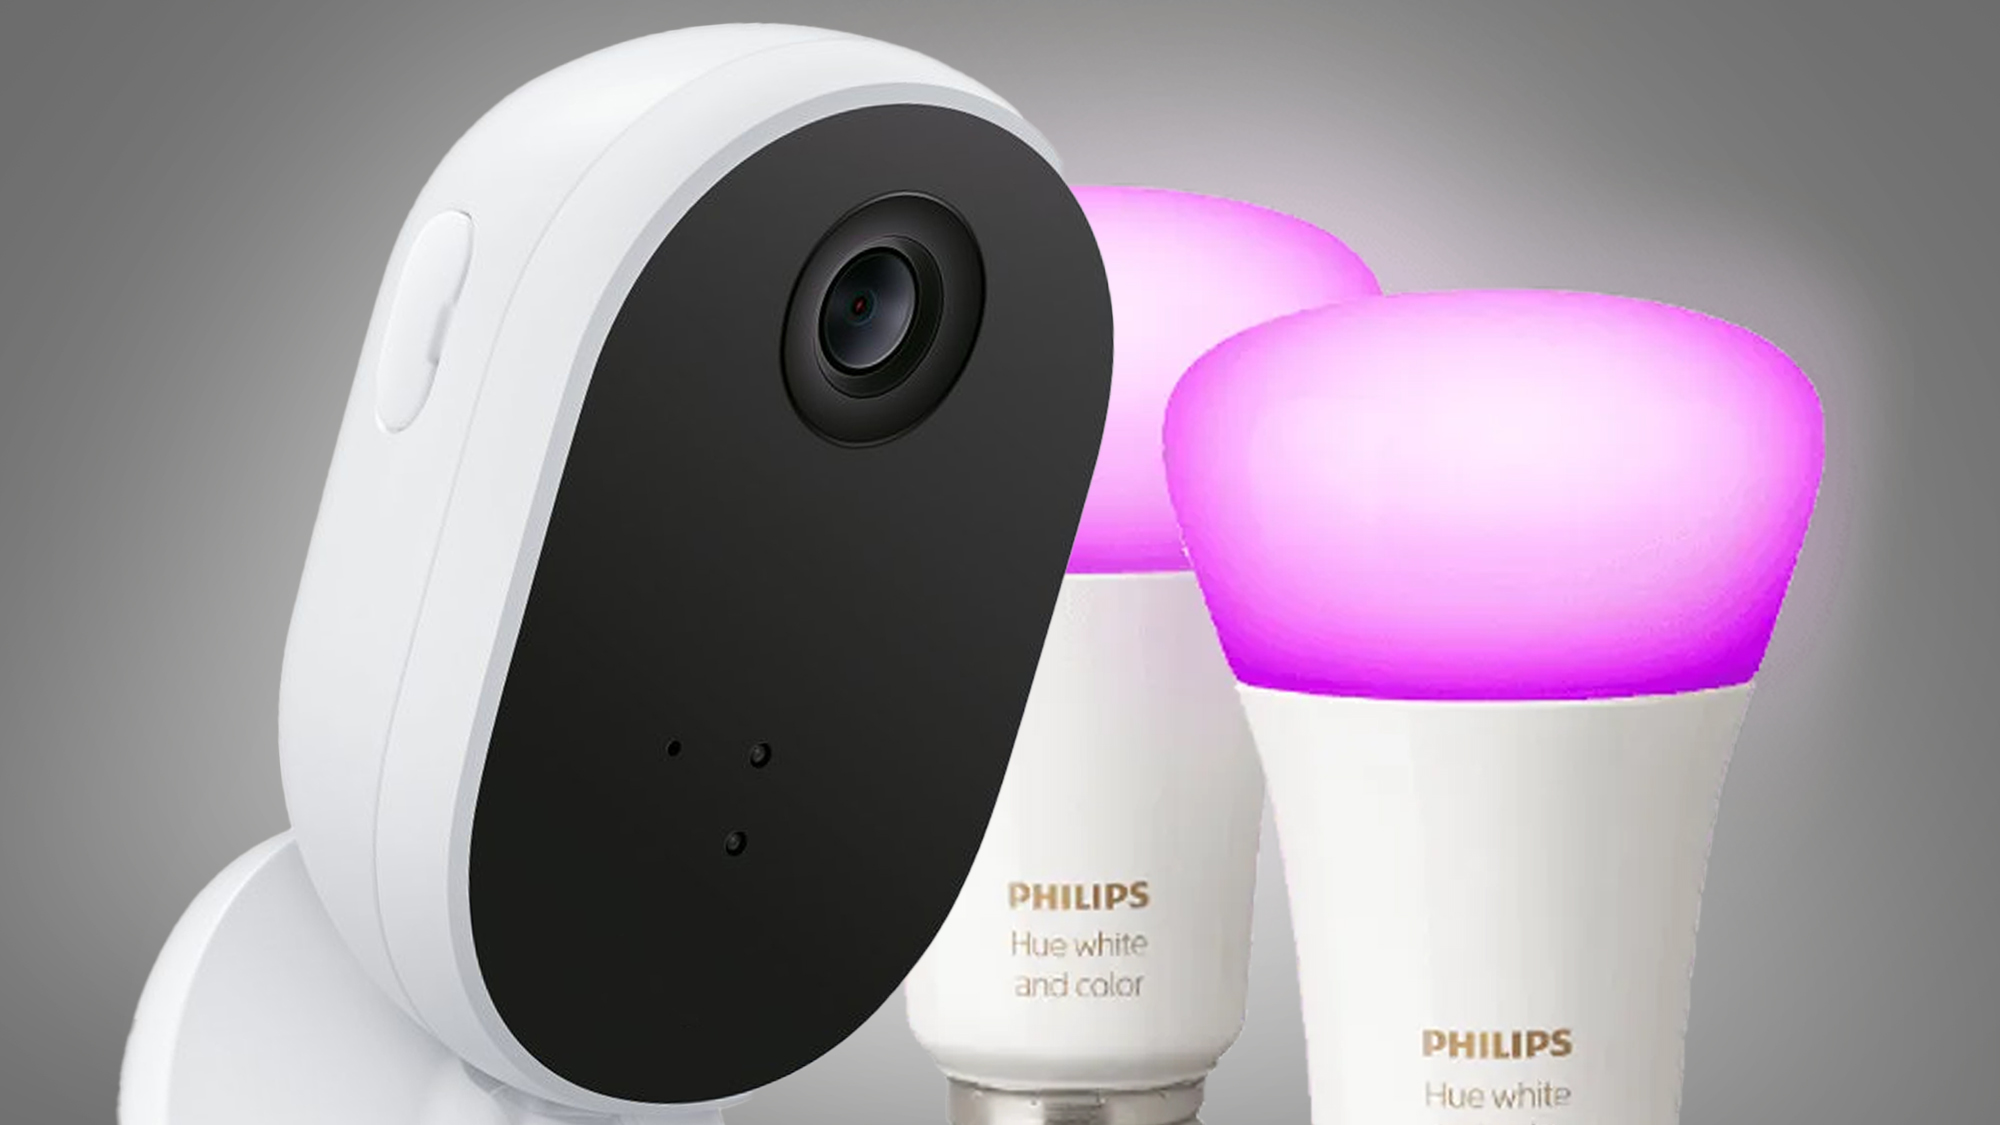 Philips Hue Says It S Making Smart Home Cameras That Can Bamboozle